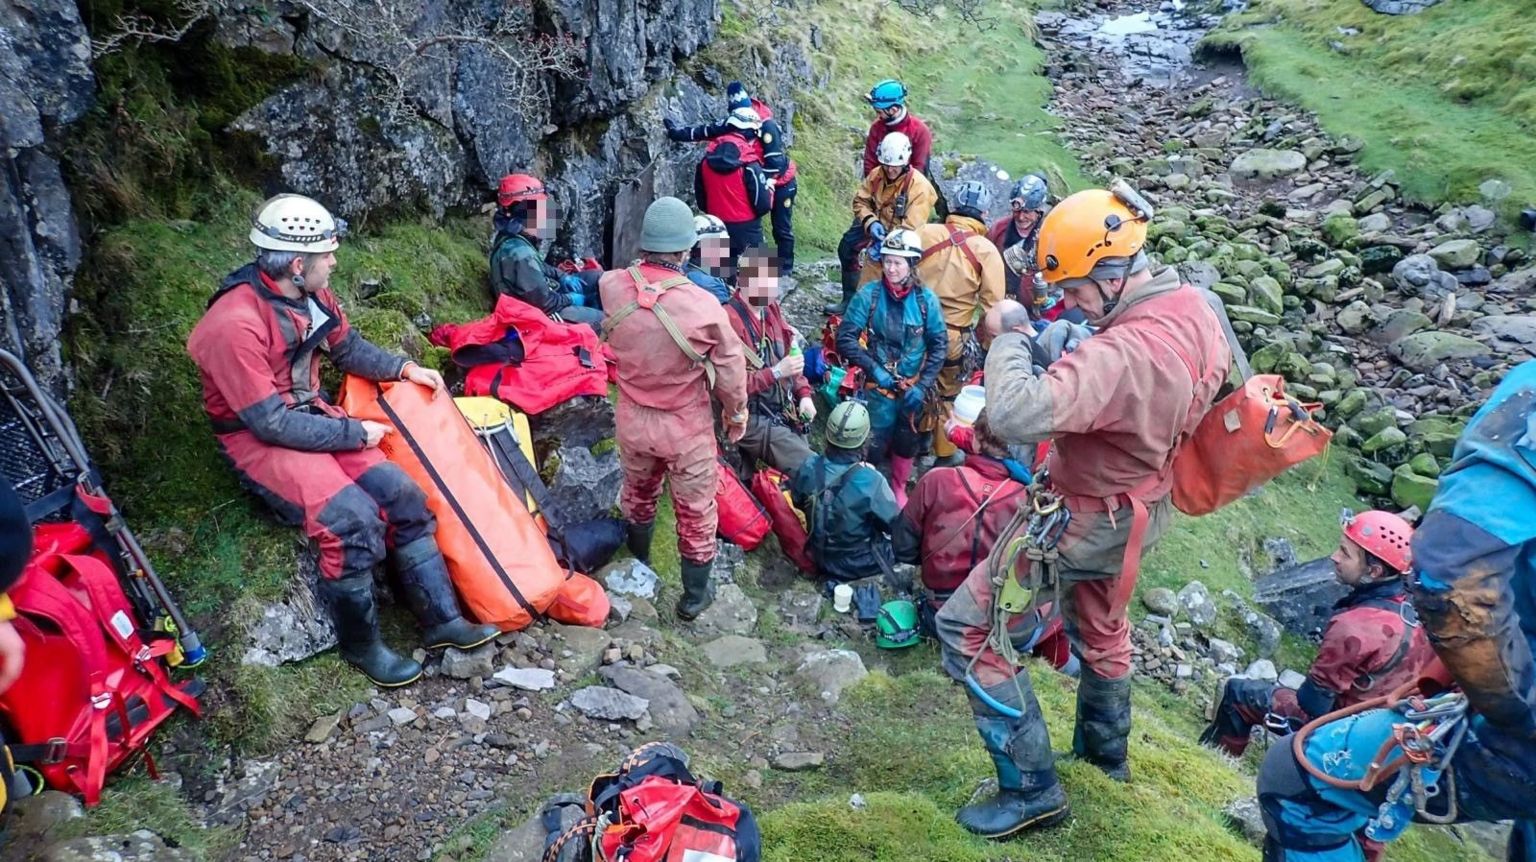 Nine cavers safe after being brought to safety